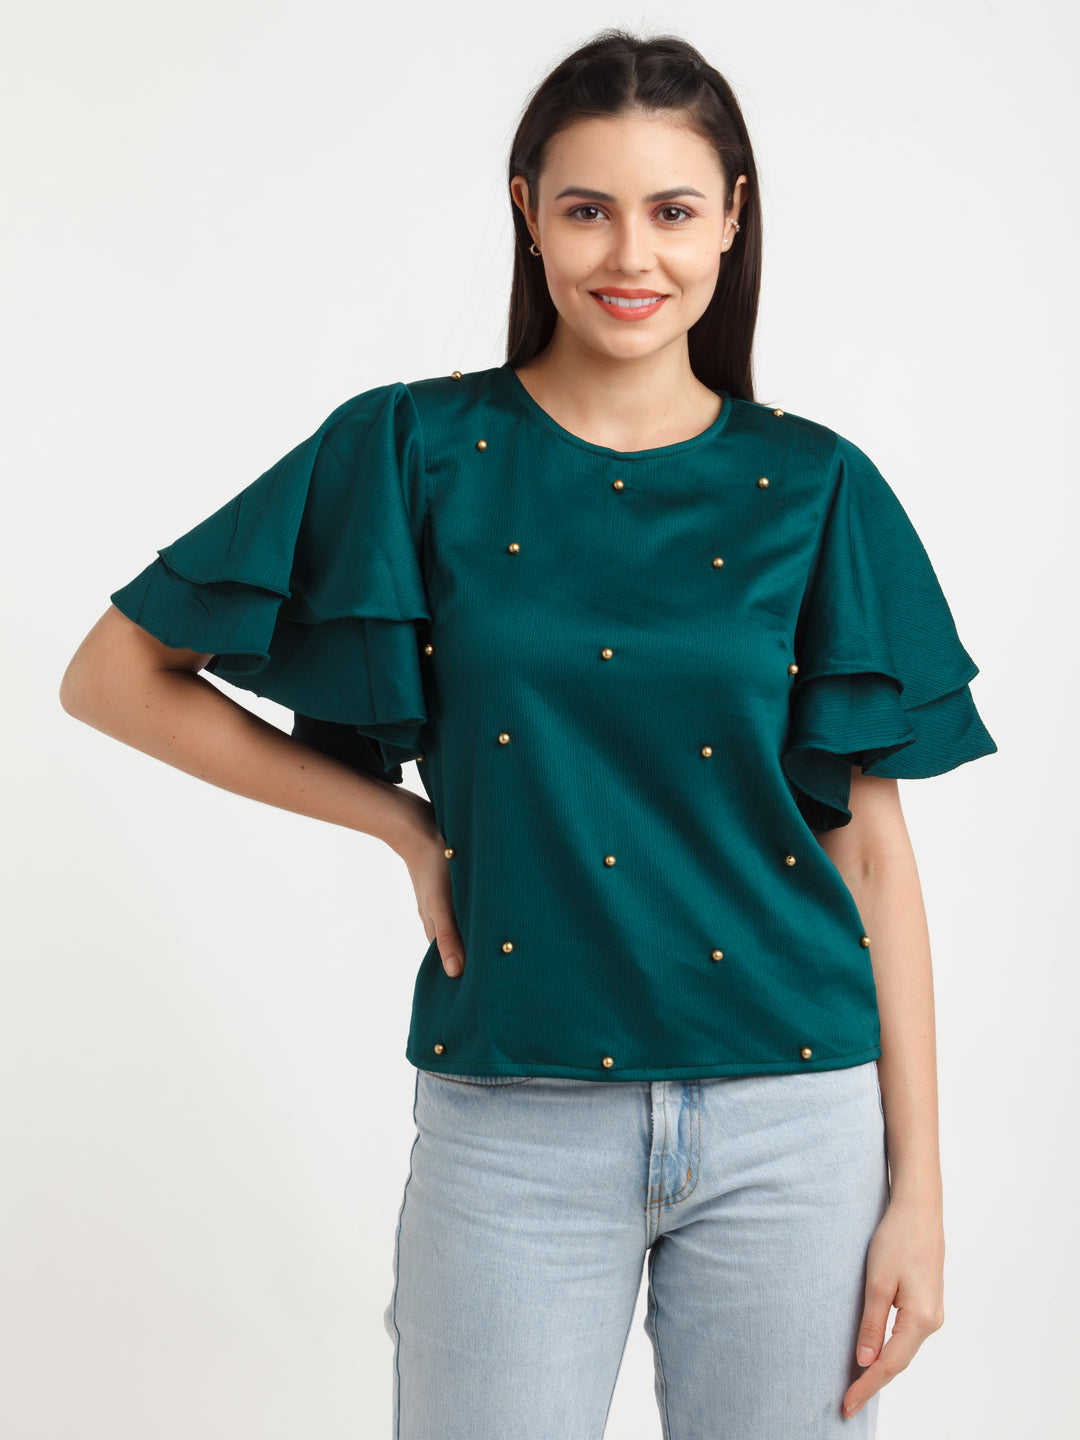 Green Embellished Top For Women